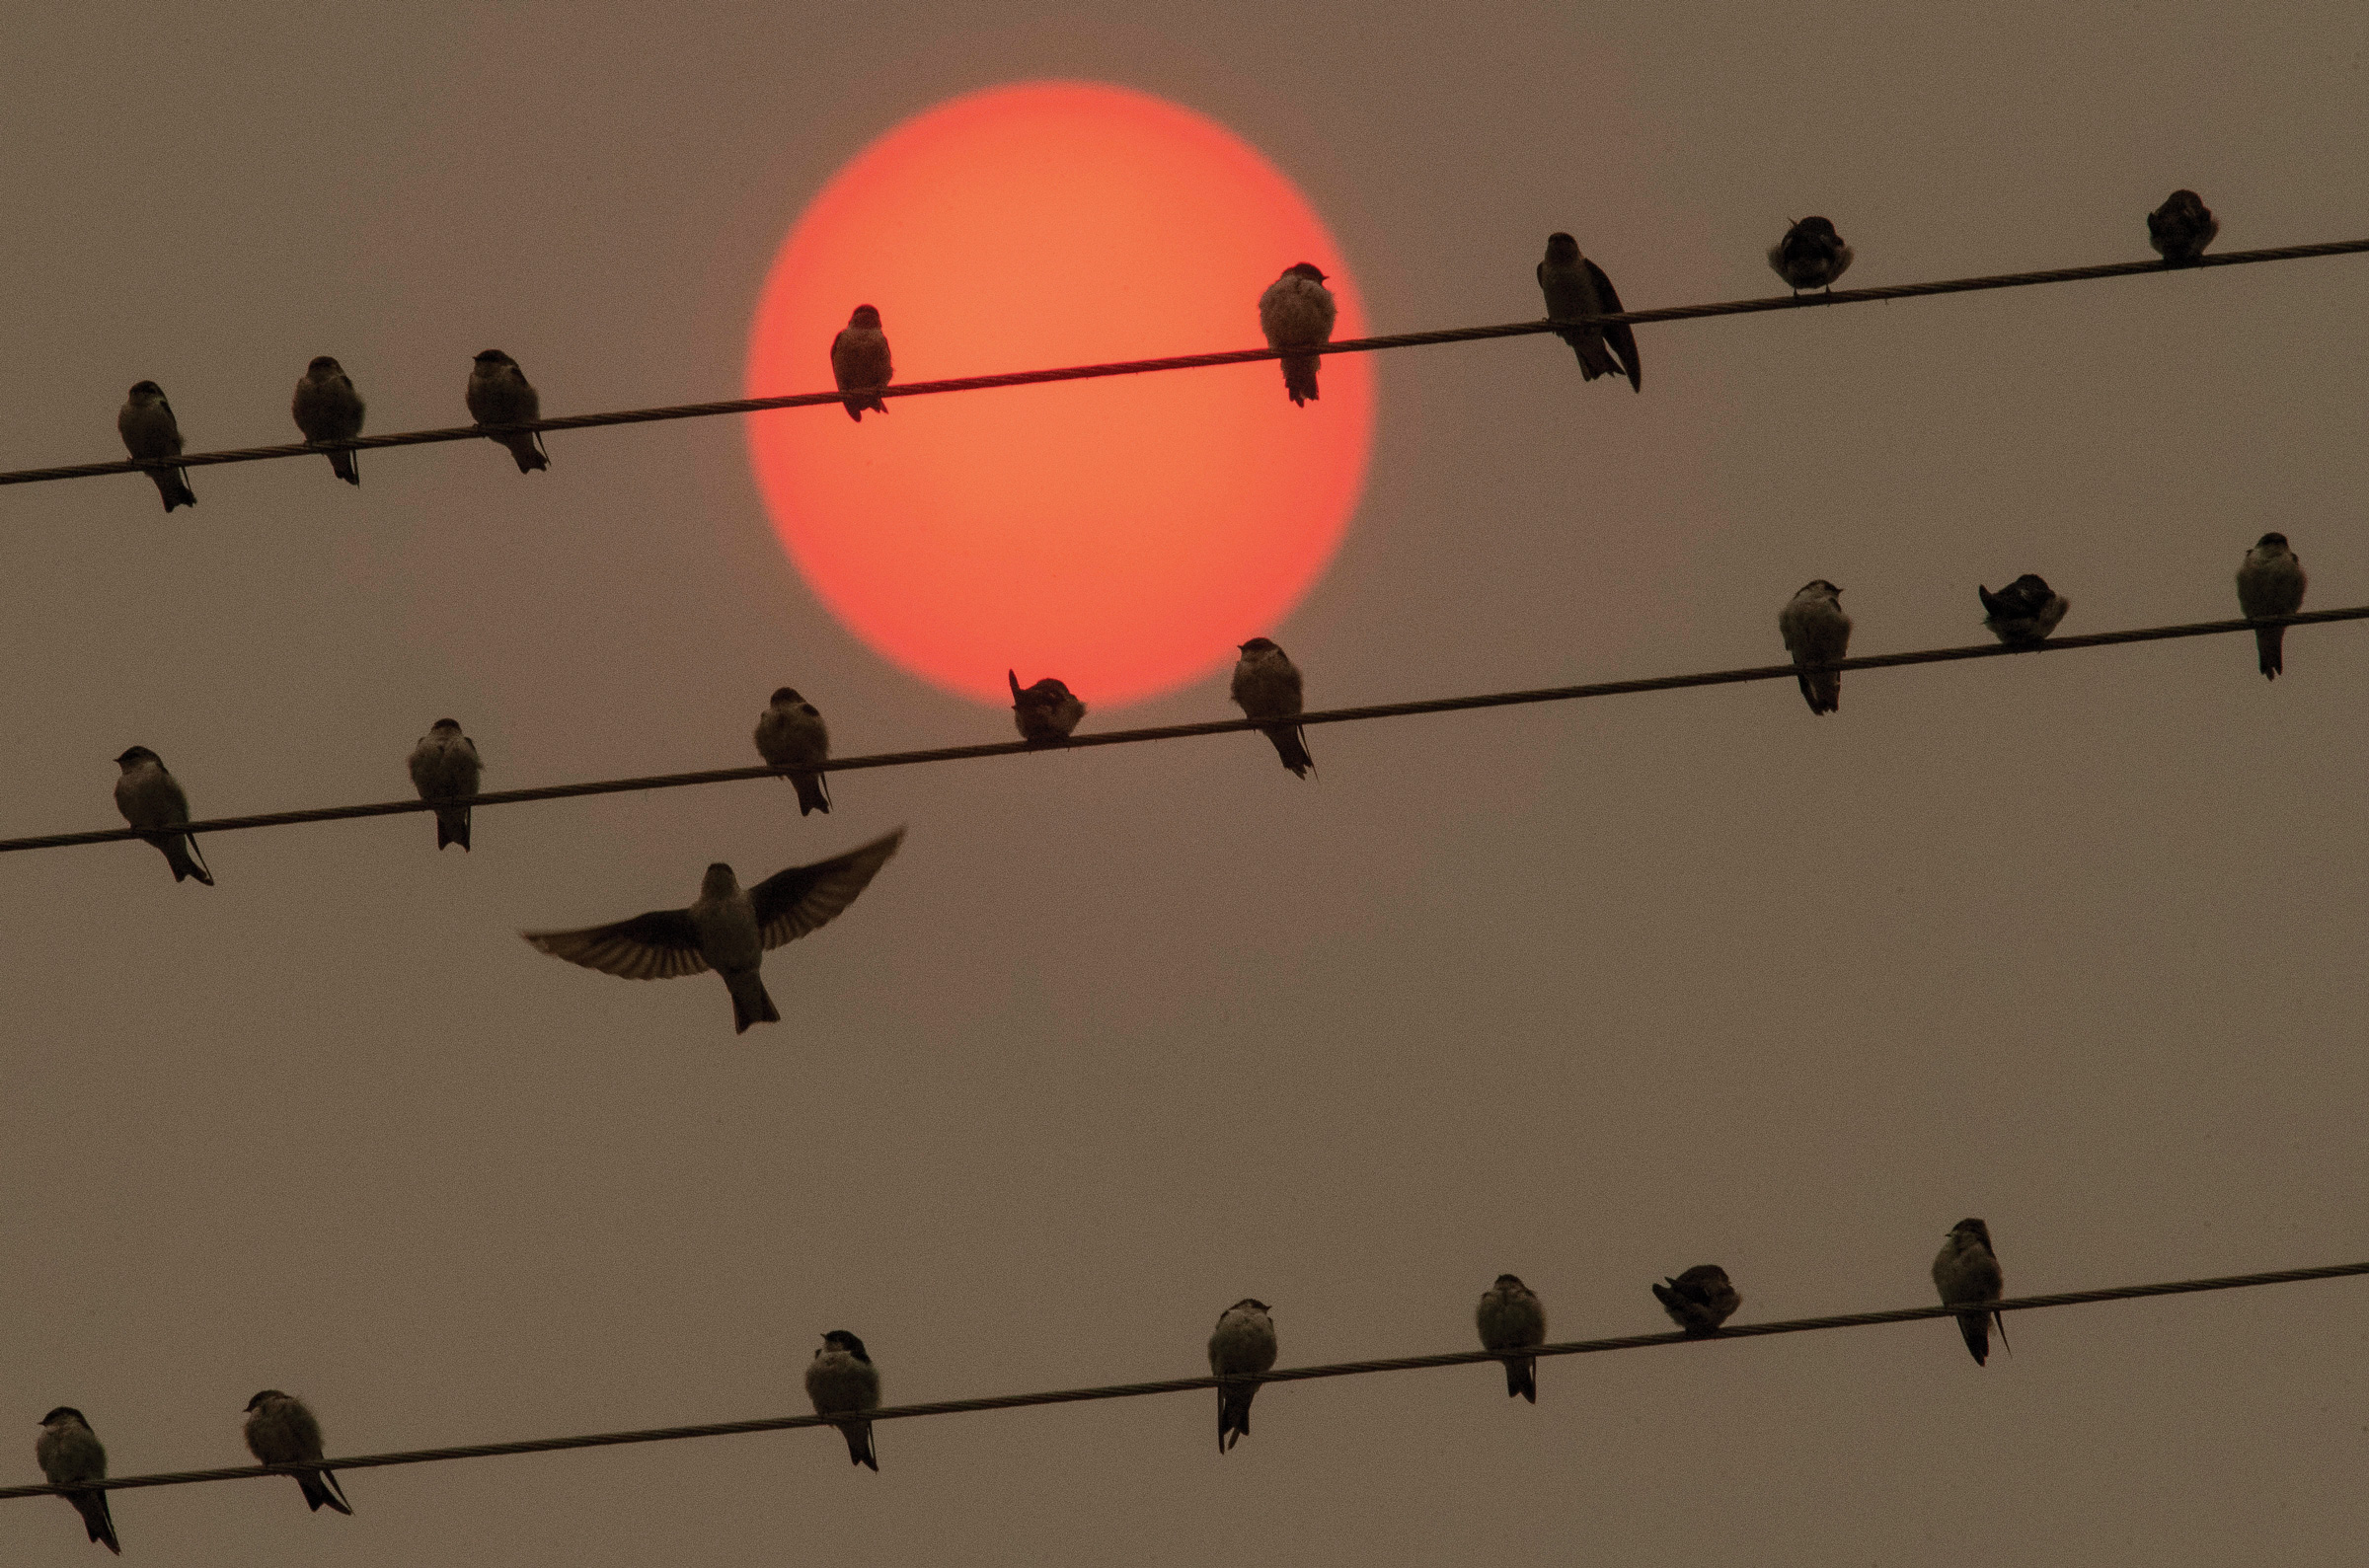 What happens to birds when it’s smoky outside?